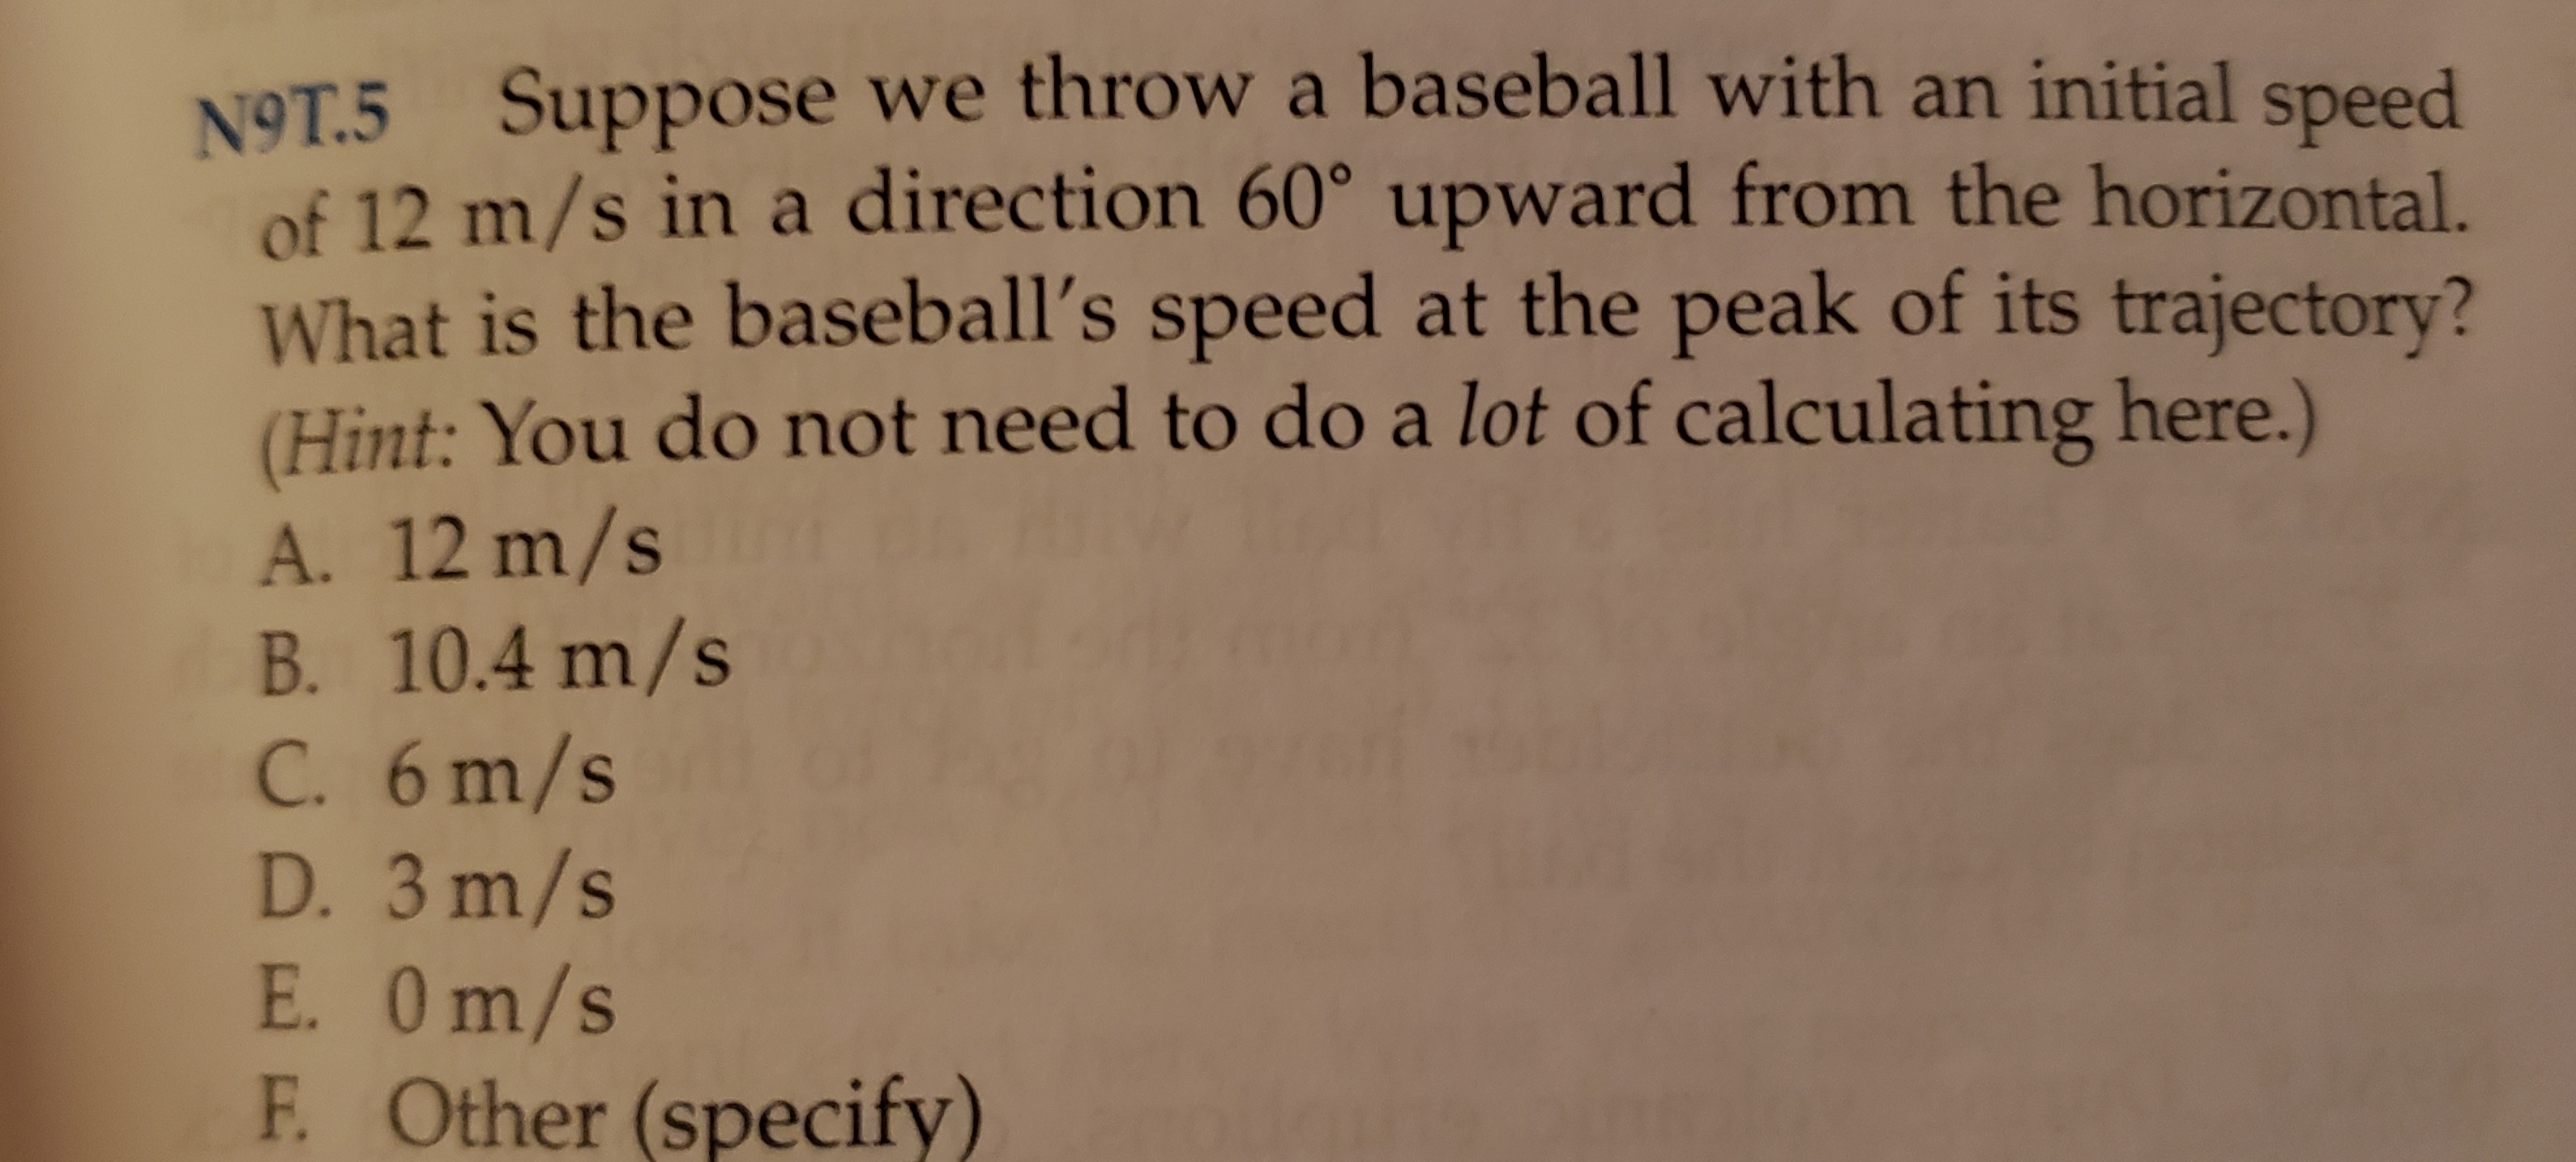 N9T.5 Suppose we throw a baseball with an initial speed
of 12 m/s in a direction 60° upward from the horizontal.
What is the baseball's speed at the peak of its trajectory?
(Hint: You do not need to do a lot of calculating here.)
A. 12 m/s
B. 10.4 m/s
C. 6m/s
D. 3 m/s
E. Om/s
Other (specify
F.
